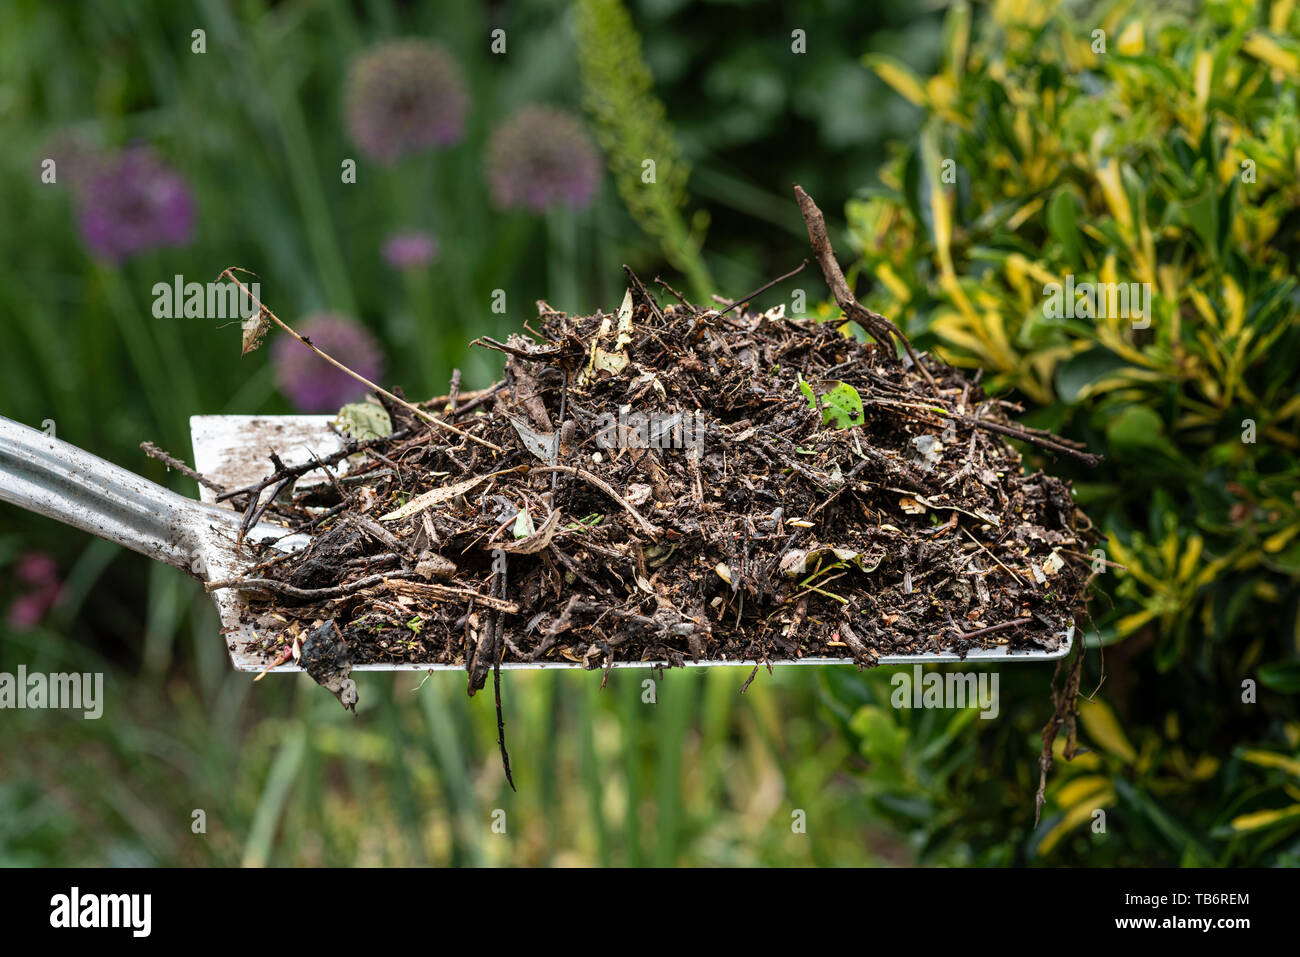 Partially decomposed green garden waste, removed from a compost bin. Stock Photo